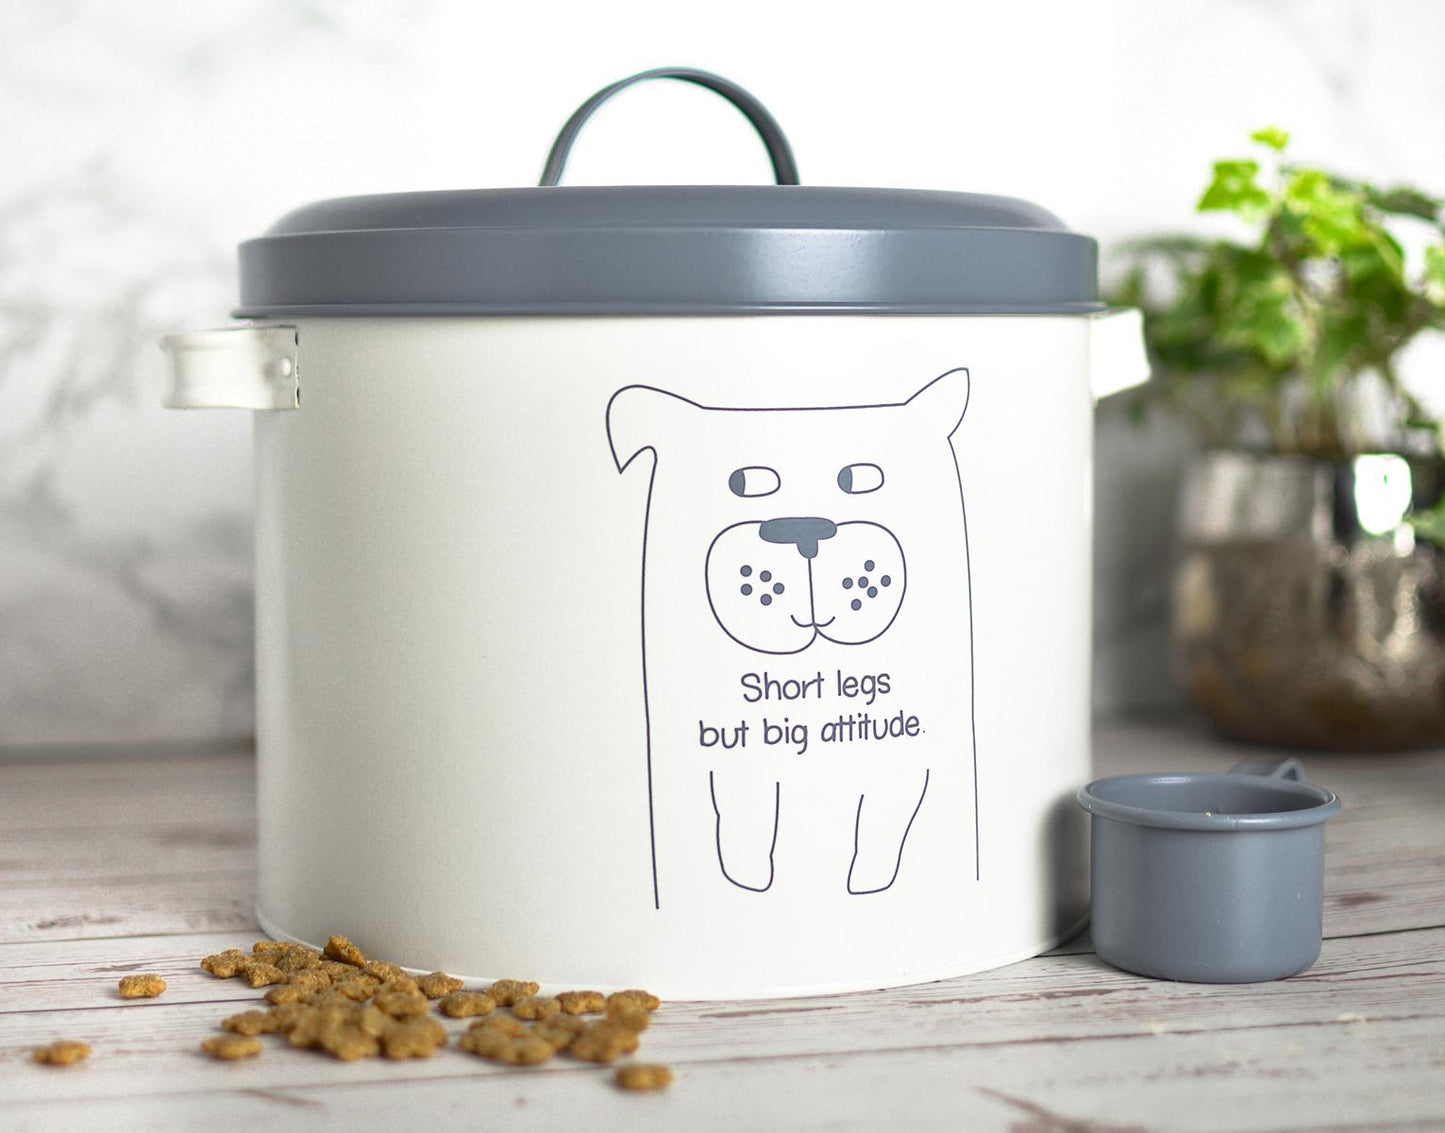 Dry food can with lid and spoon 6 liter metal can animal food storage can dog food box dog